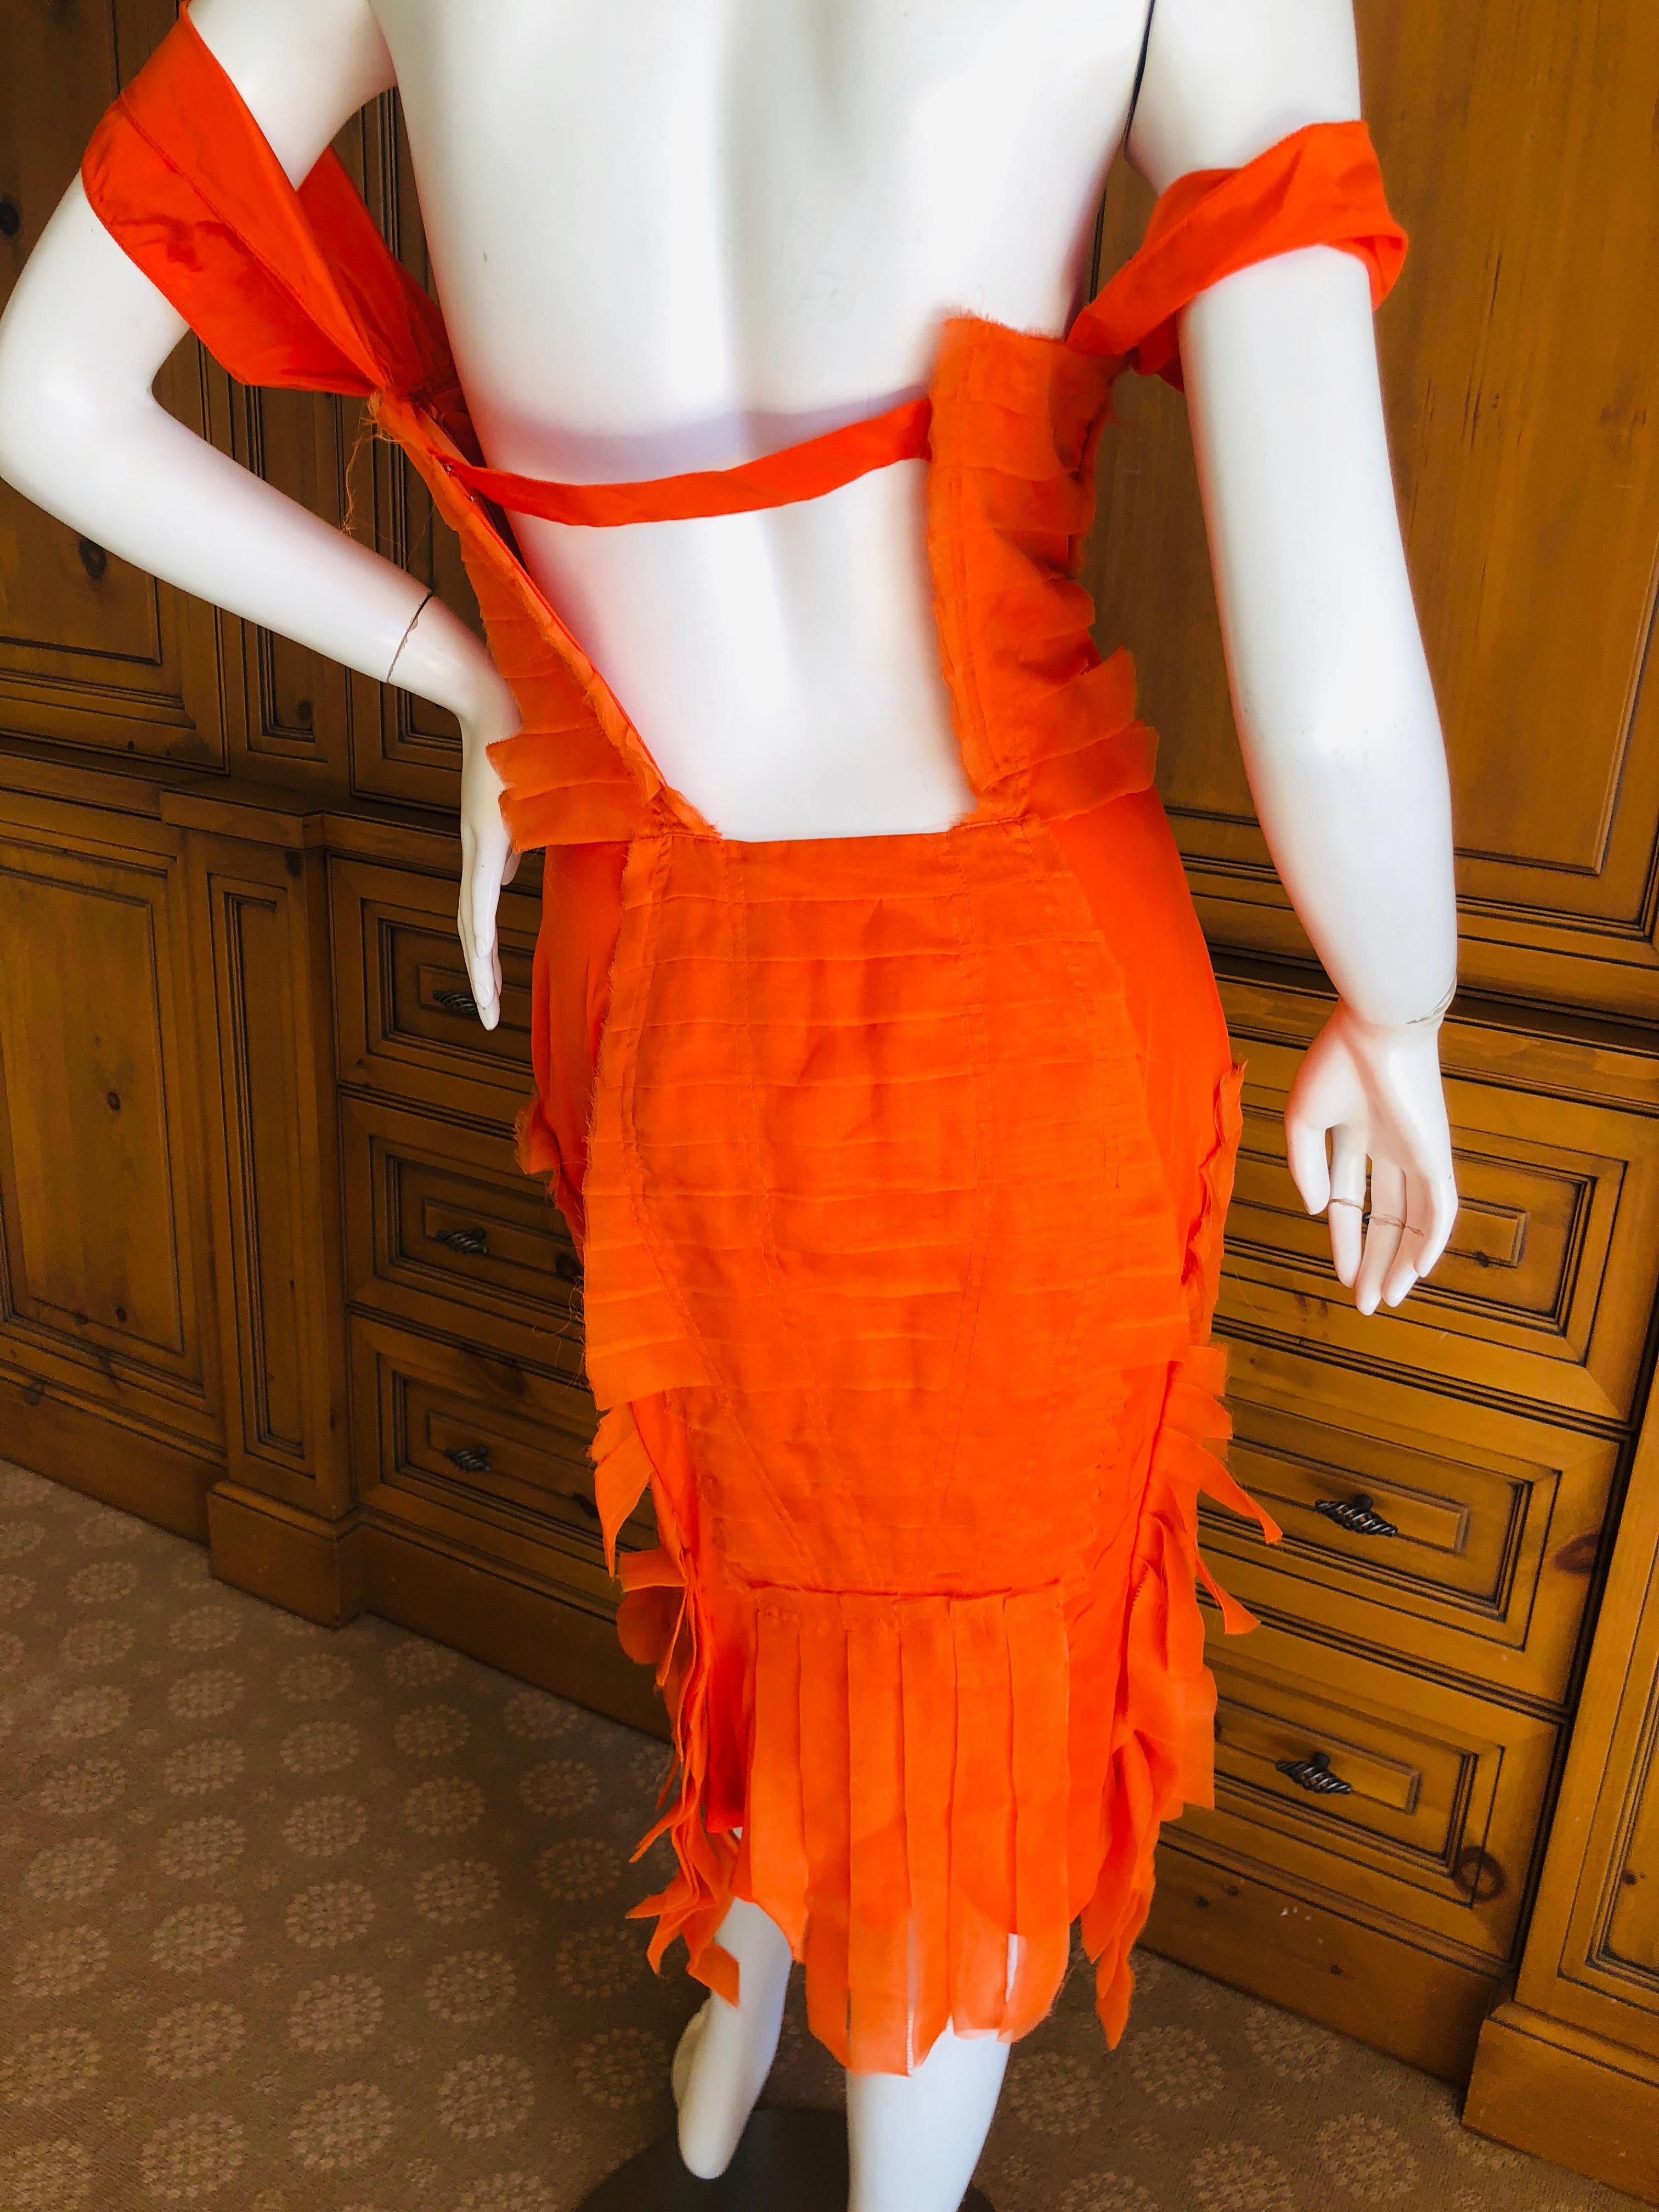 Gucci by Tom Ford 2004 Orange Ribbon Dress Tom Ford Book Piece New Tags For Sale 3